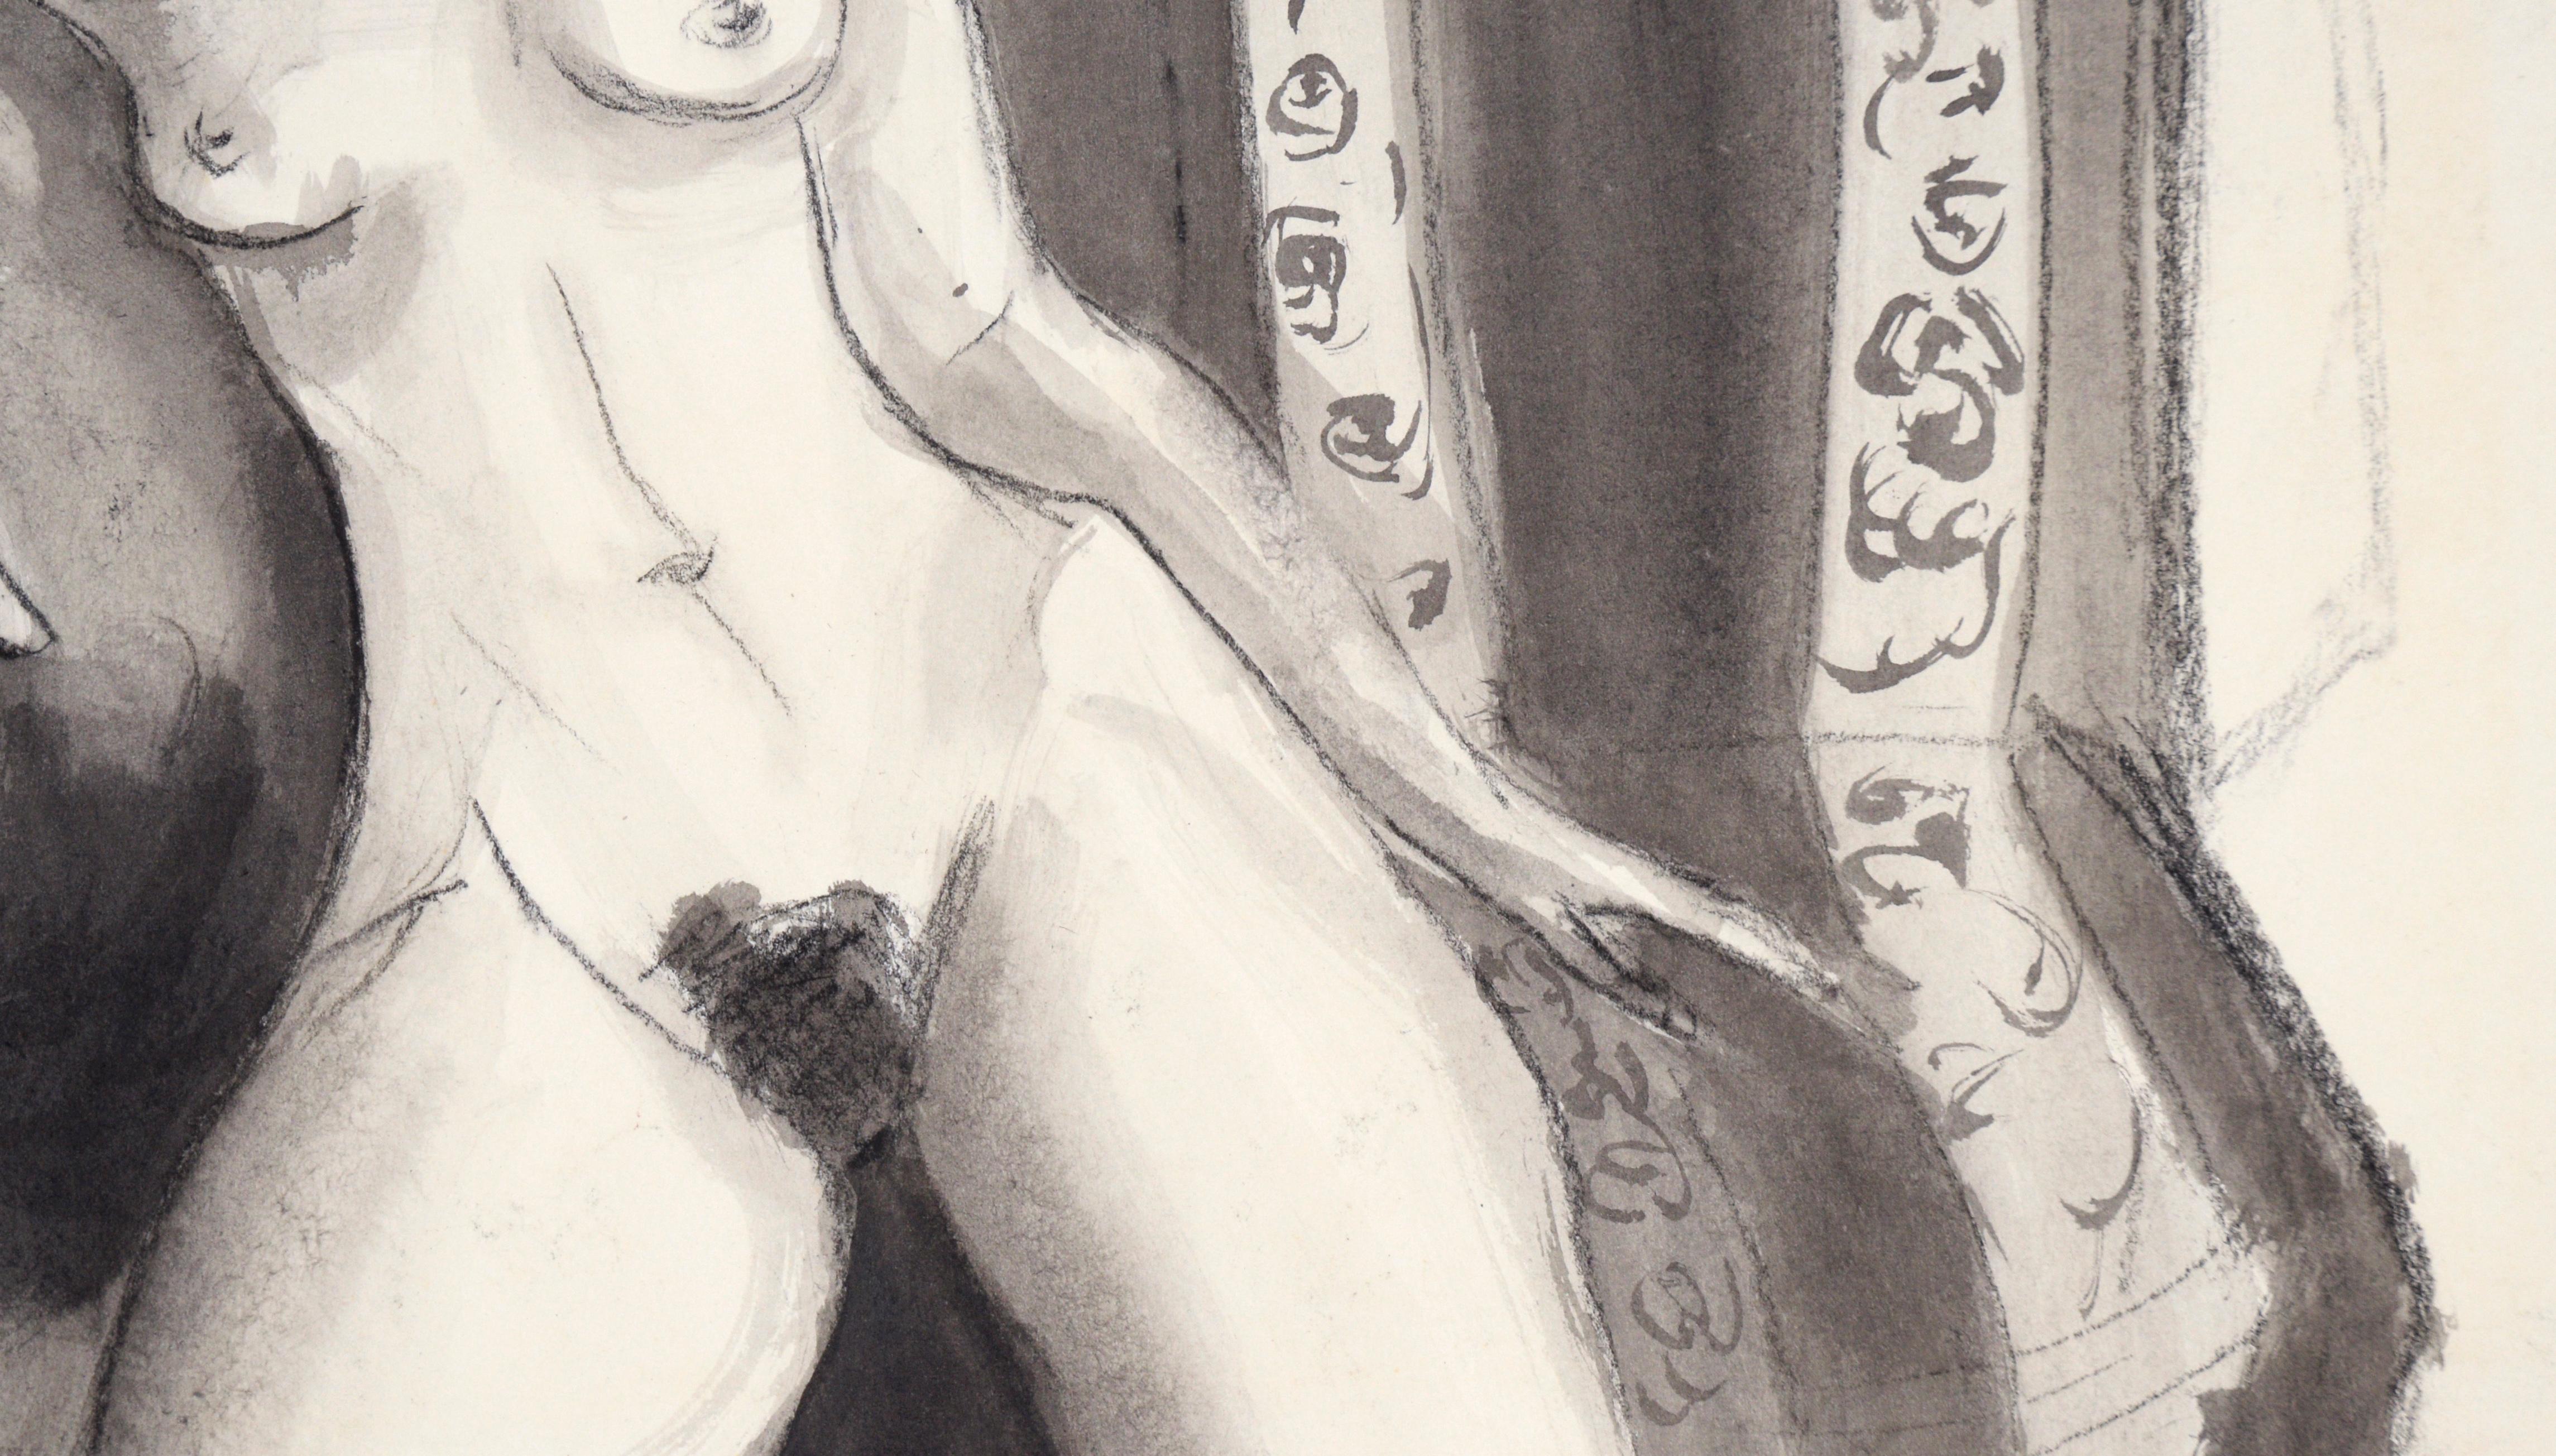 Nude Woman on Striped Chair #1 in Charcoal and Gouache on Paper For Sale 1